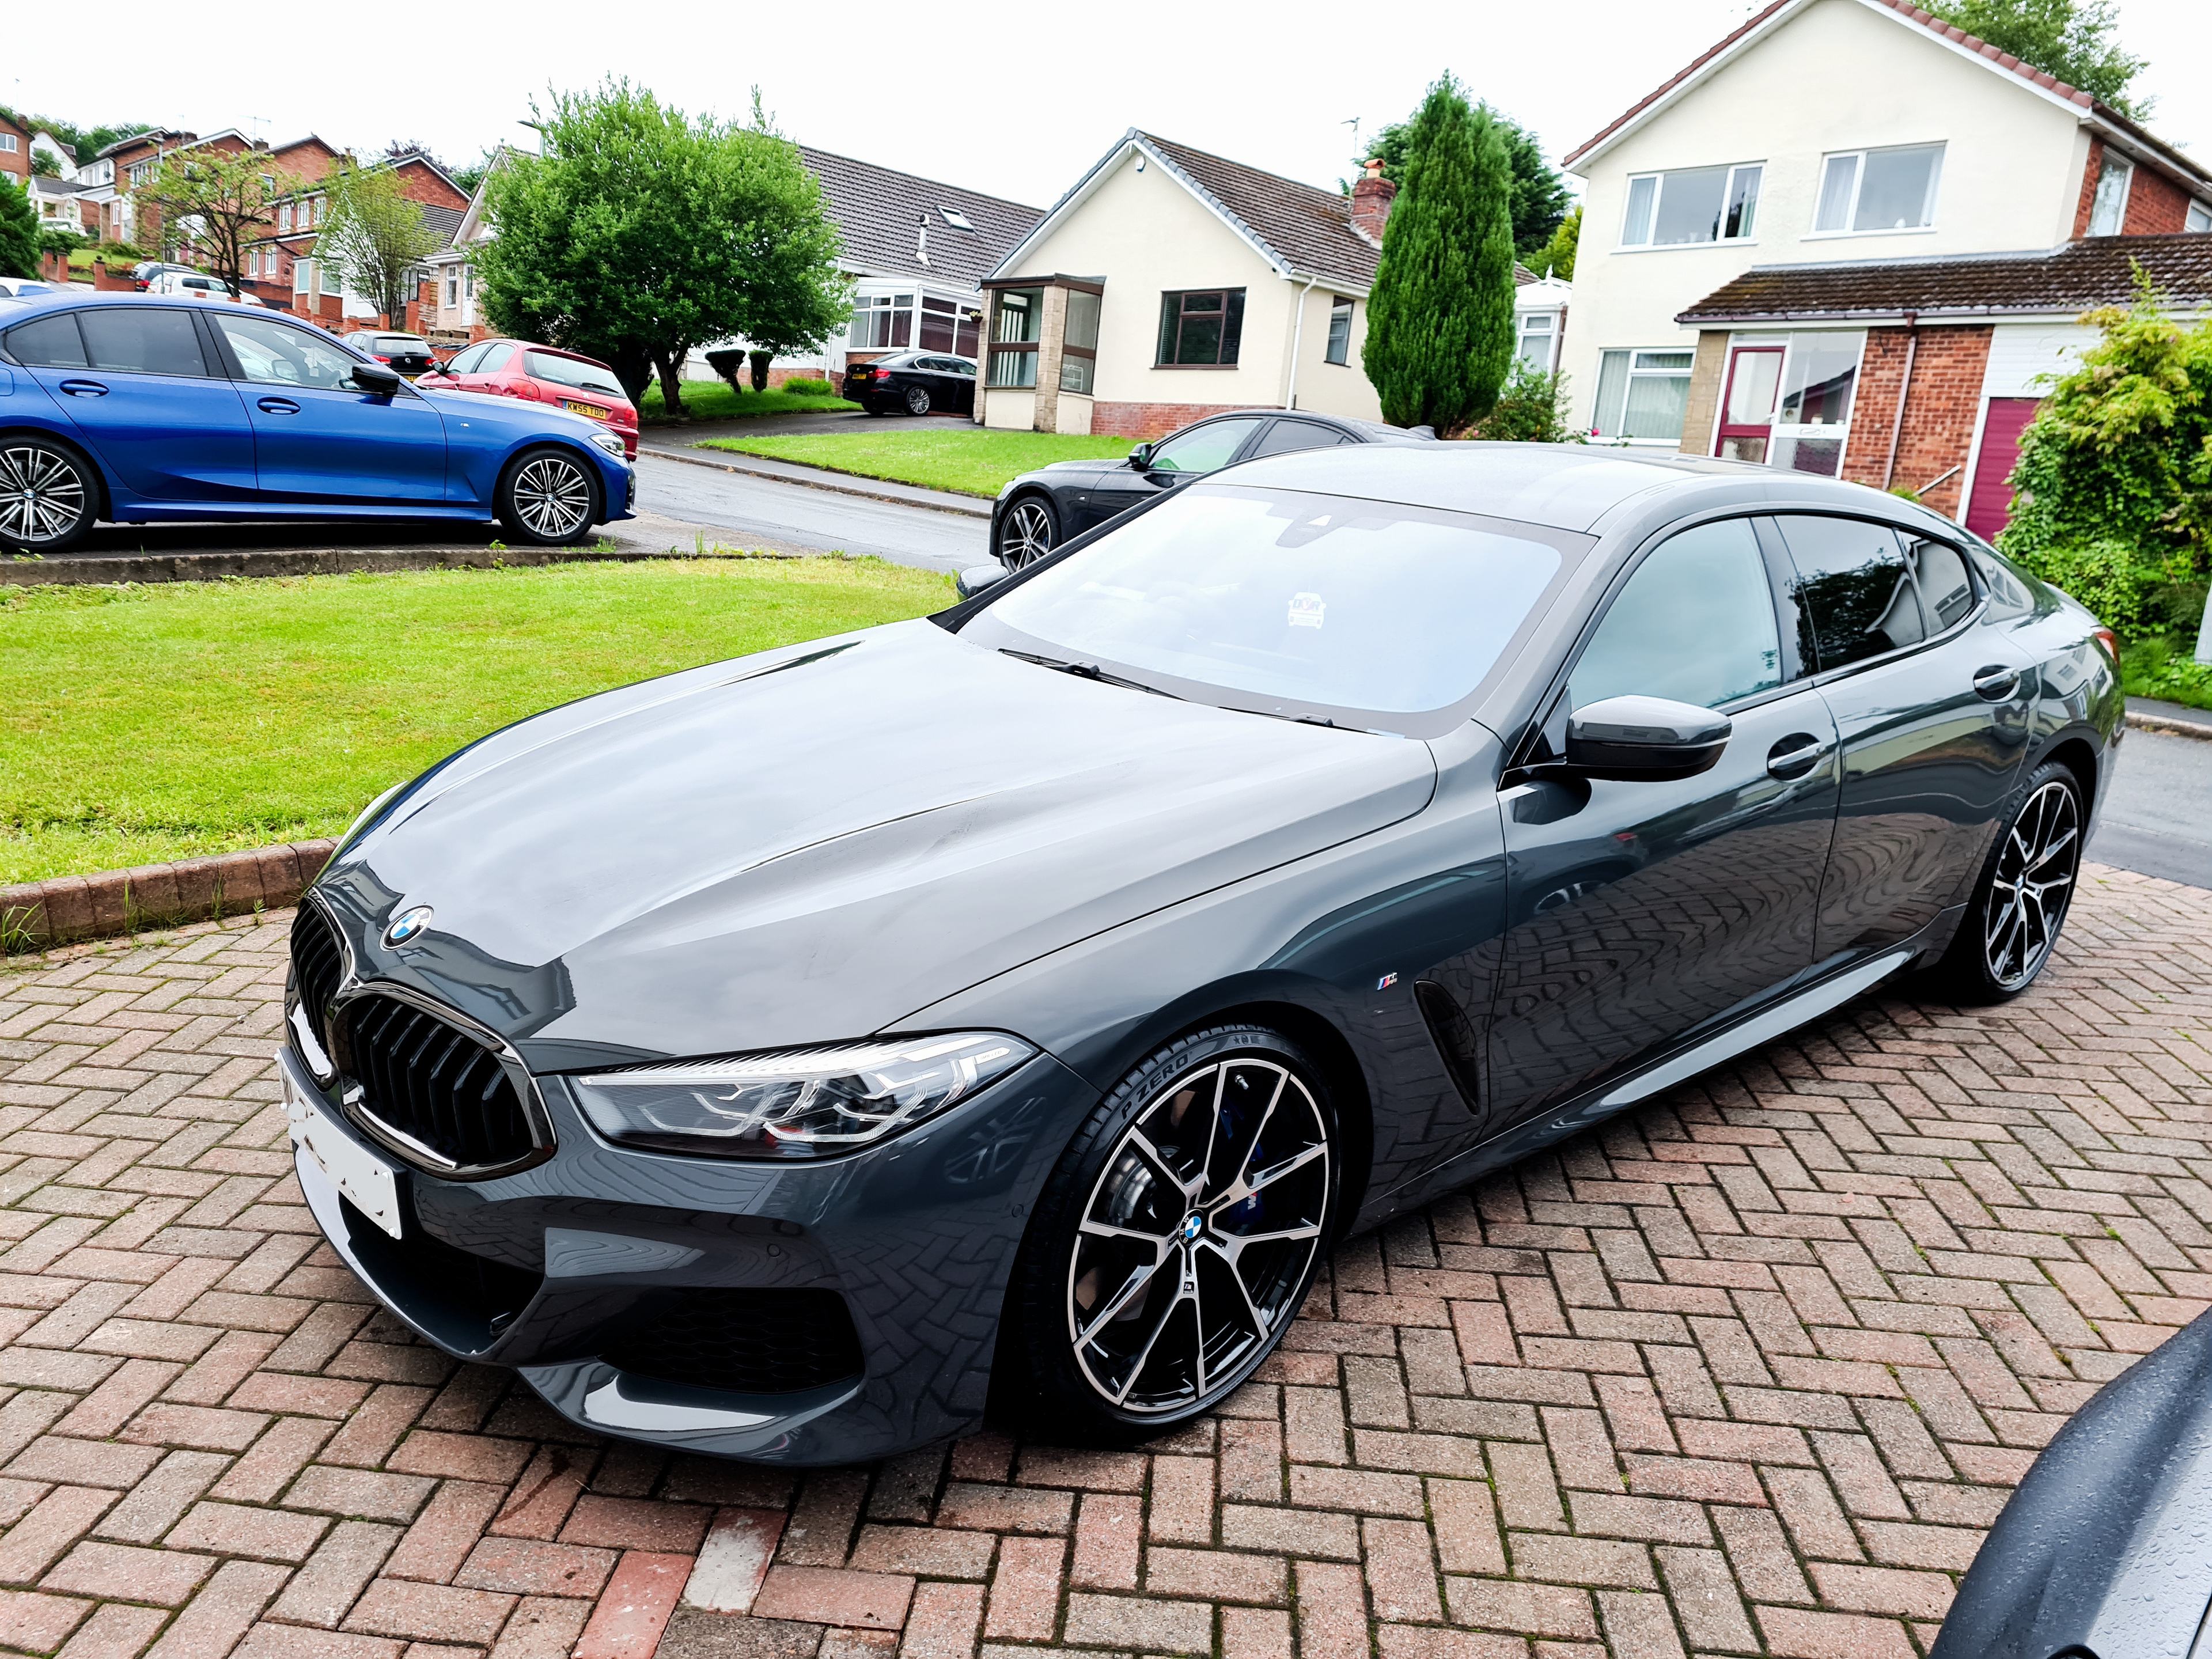 840i M Sport Lease Deal - Page 159 - BMW General - PistonHeads